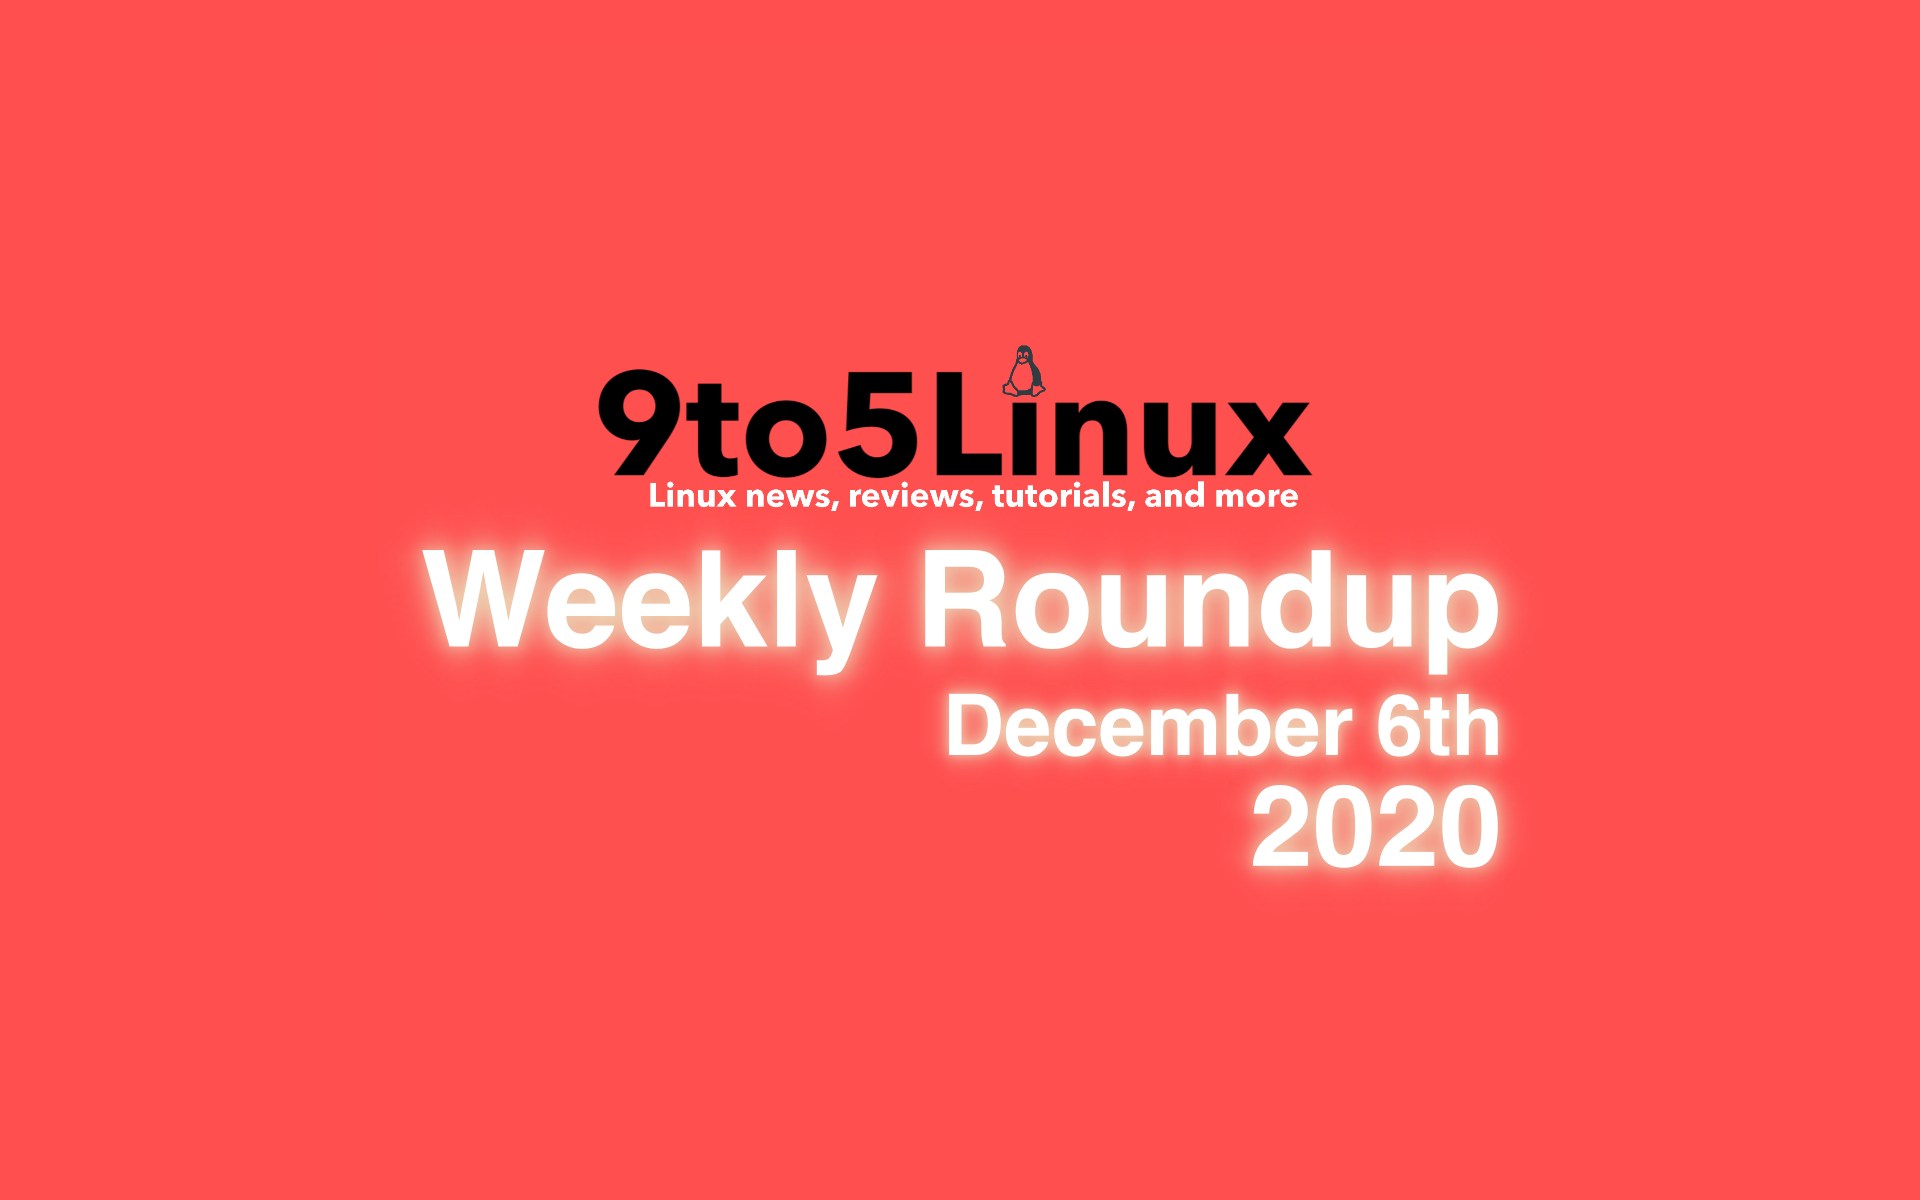 9to5Linux Weekly Roundup: December 6th, 2020